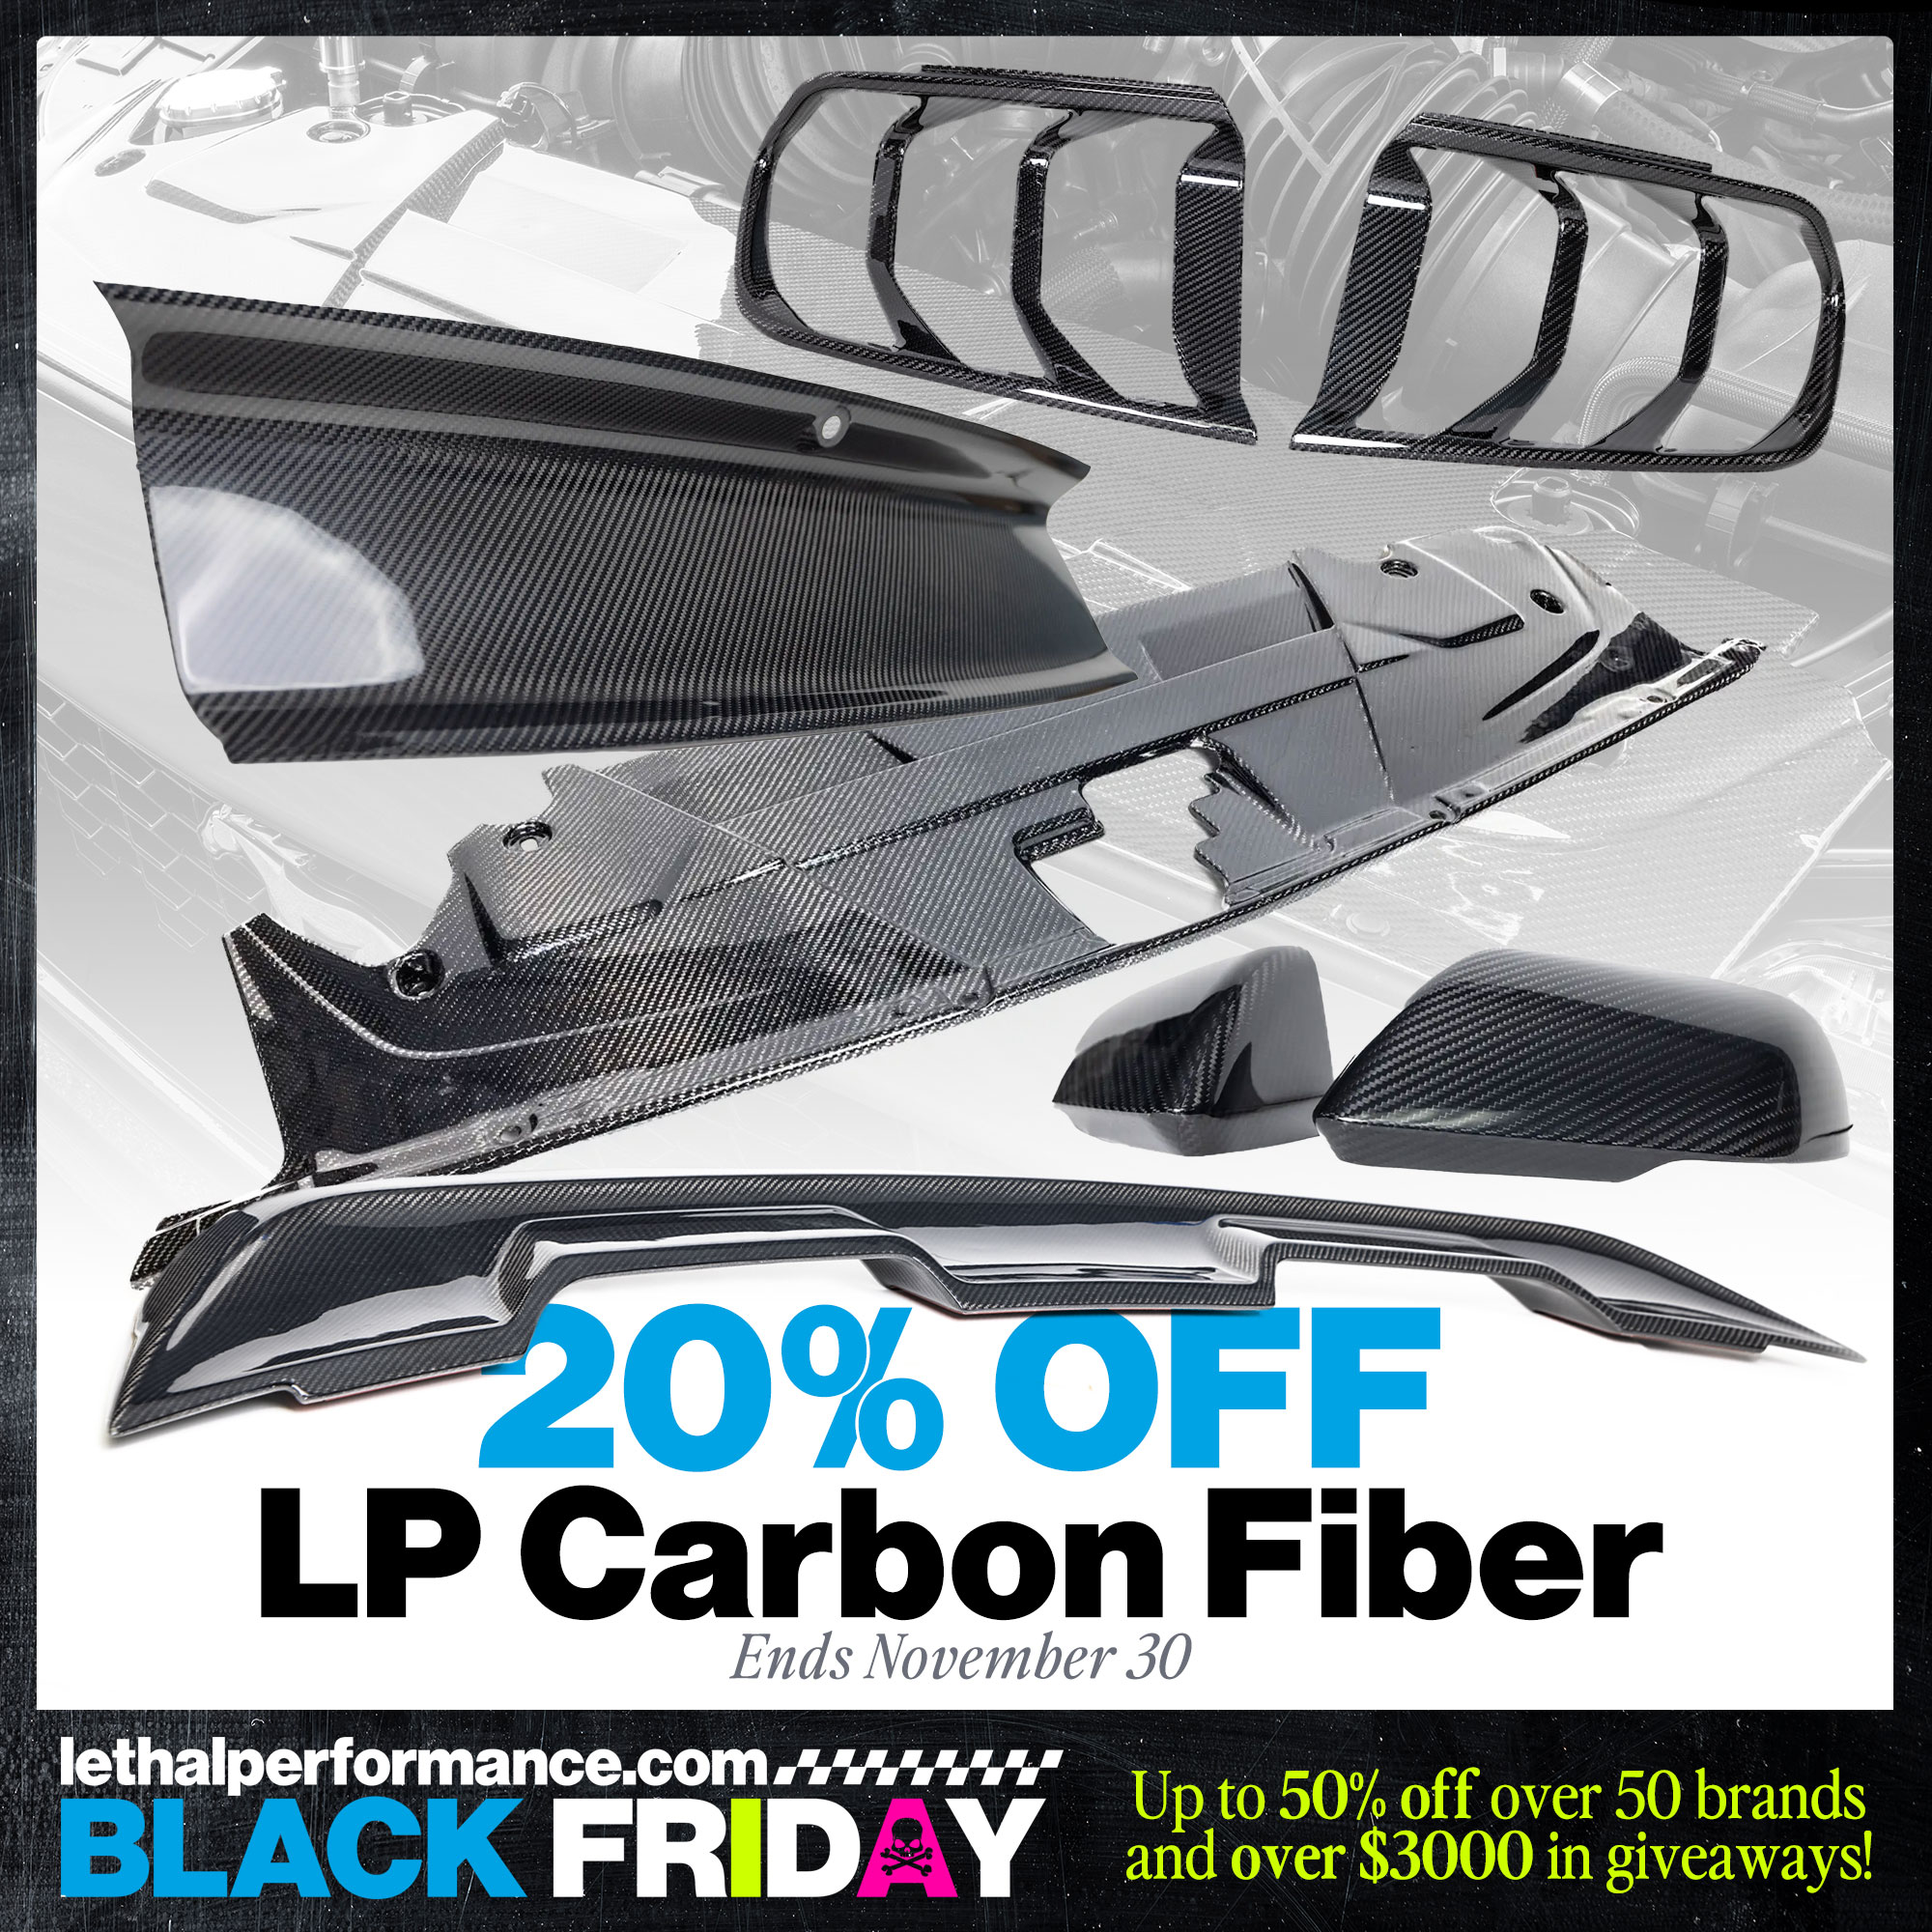 S650 Mustang Black Friday starts NOW! Up to 50% off! LP_Carbon